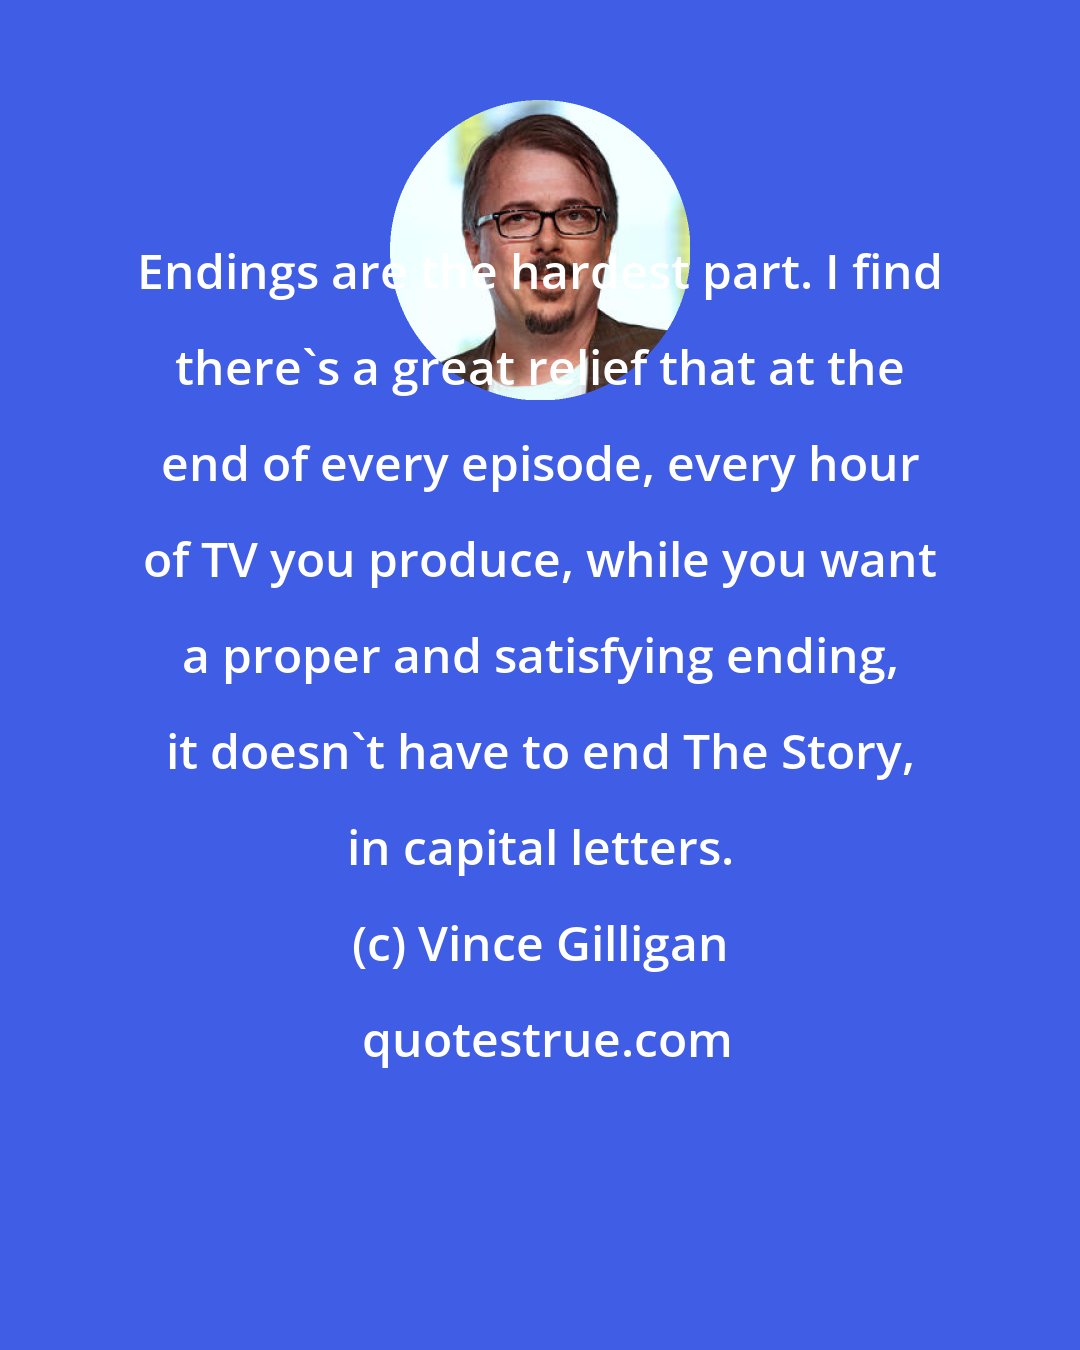 Vince Gilligan: Endings are the hardest part. I find there's a great relief that at the end of every episode, every hour of TV you produce, while you want a proper and satisfying ending, it doesn't have to end The Story, in capital letters.